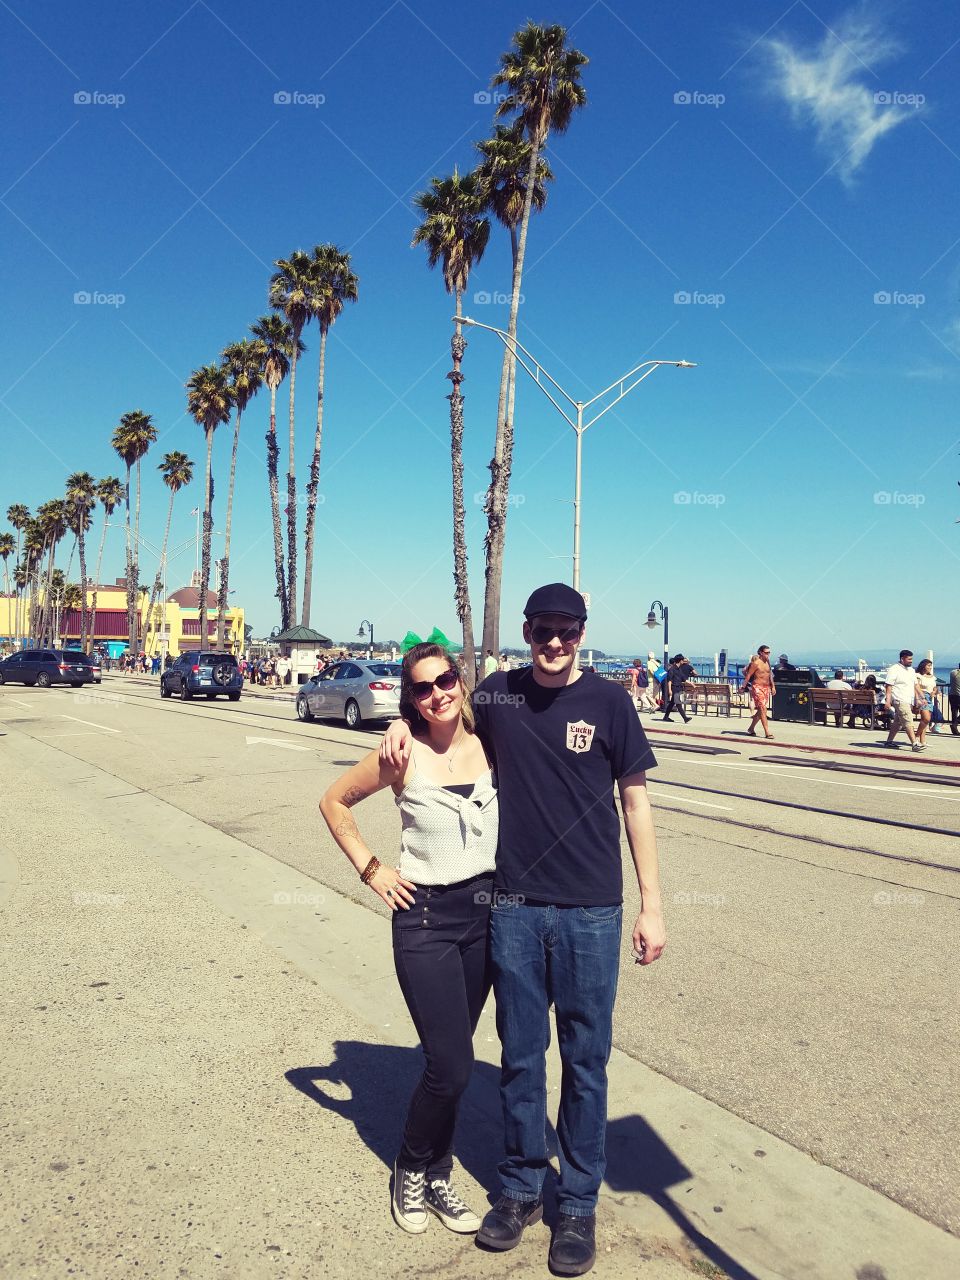 Couple Posing on a Street with Palm Trees and the Beach Behind Them